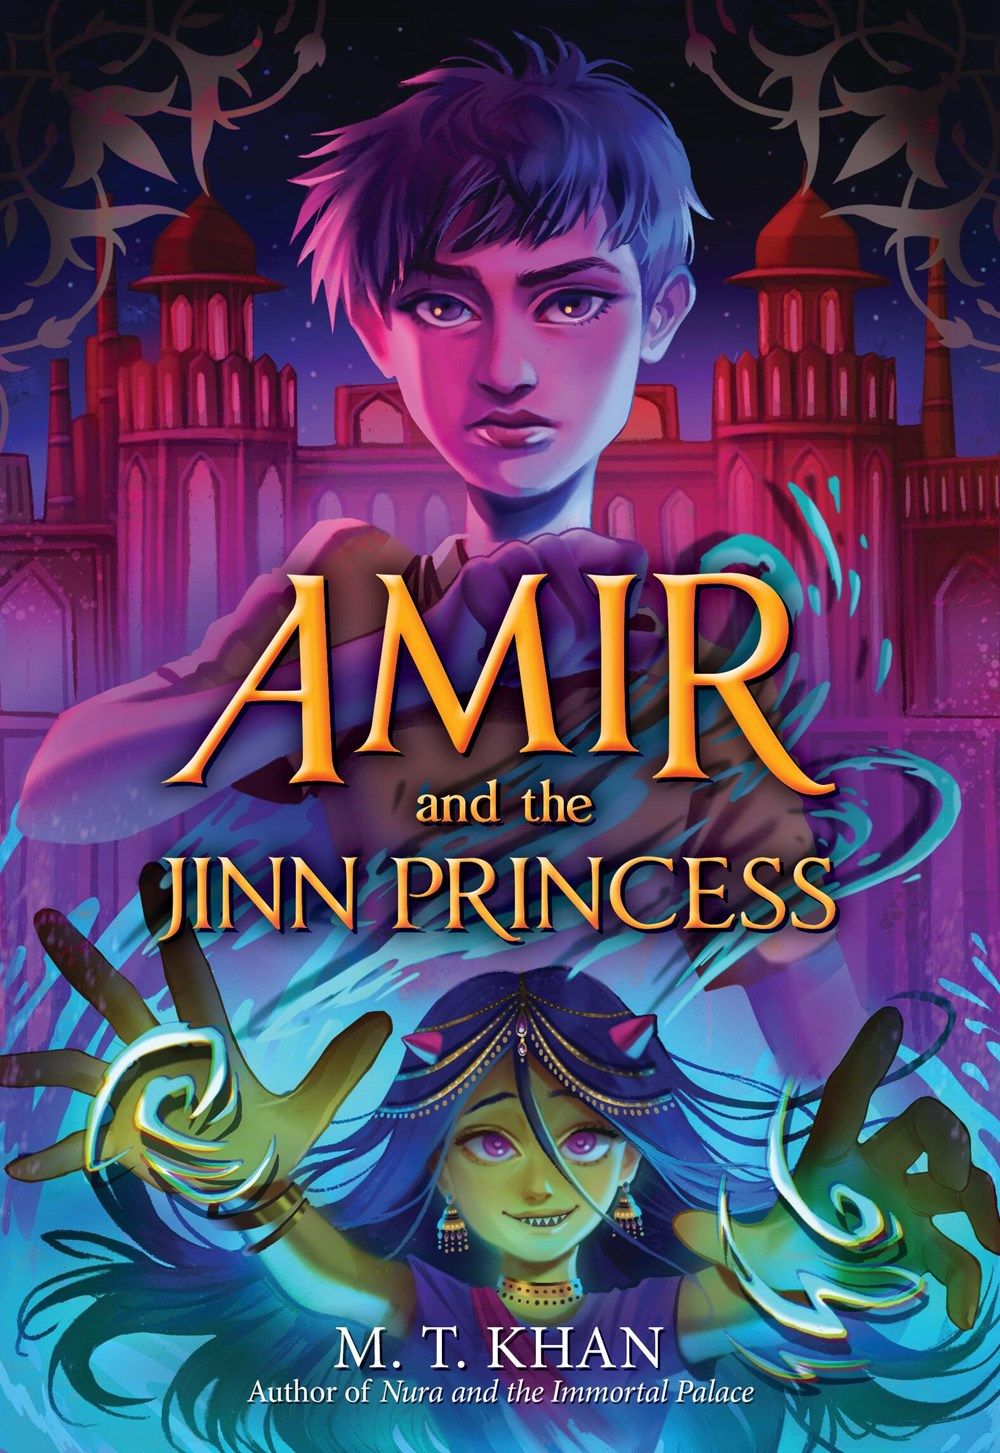 Cover of Amir and the Jinn Princess by M. T. Khan